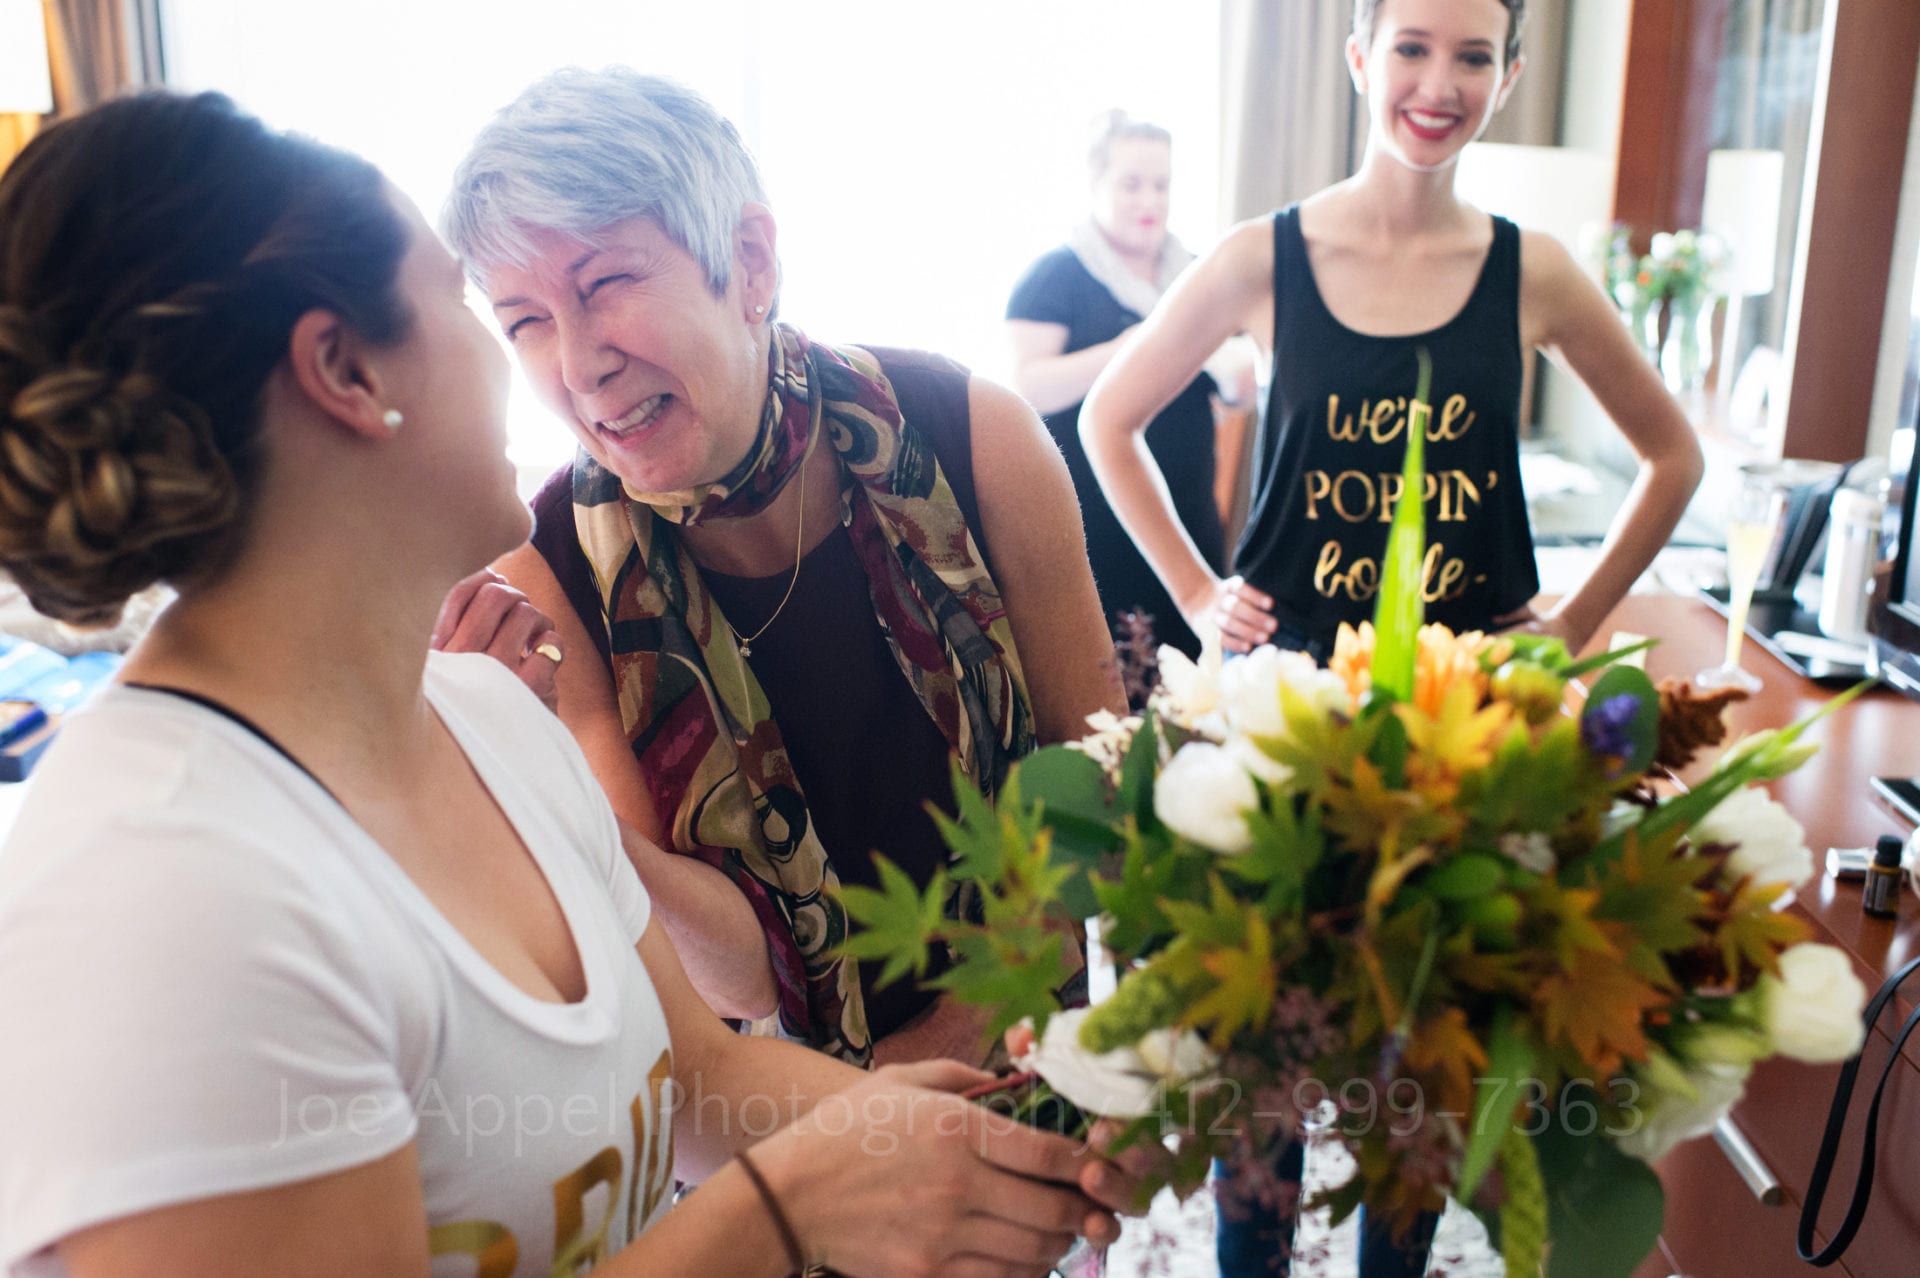 A woman holds a bouquet of flowers as an older woman leans over to her and smiles. Another woman in a black tank top stands at the rear of the frame.